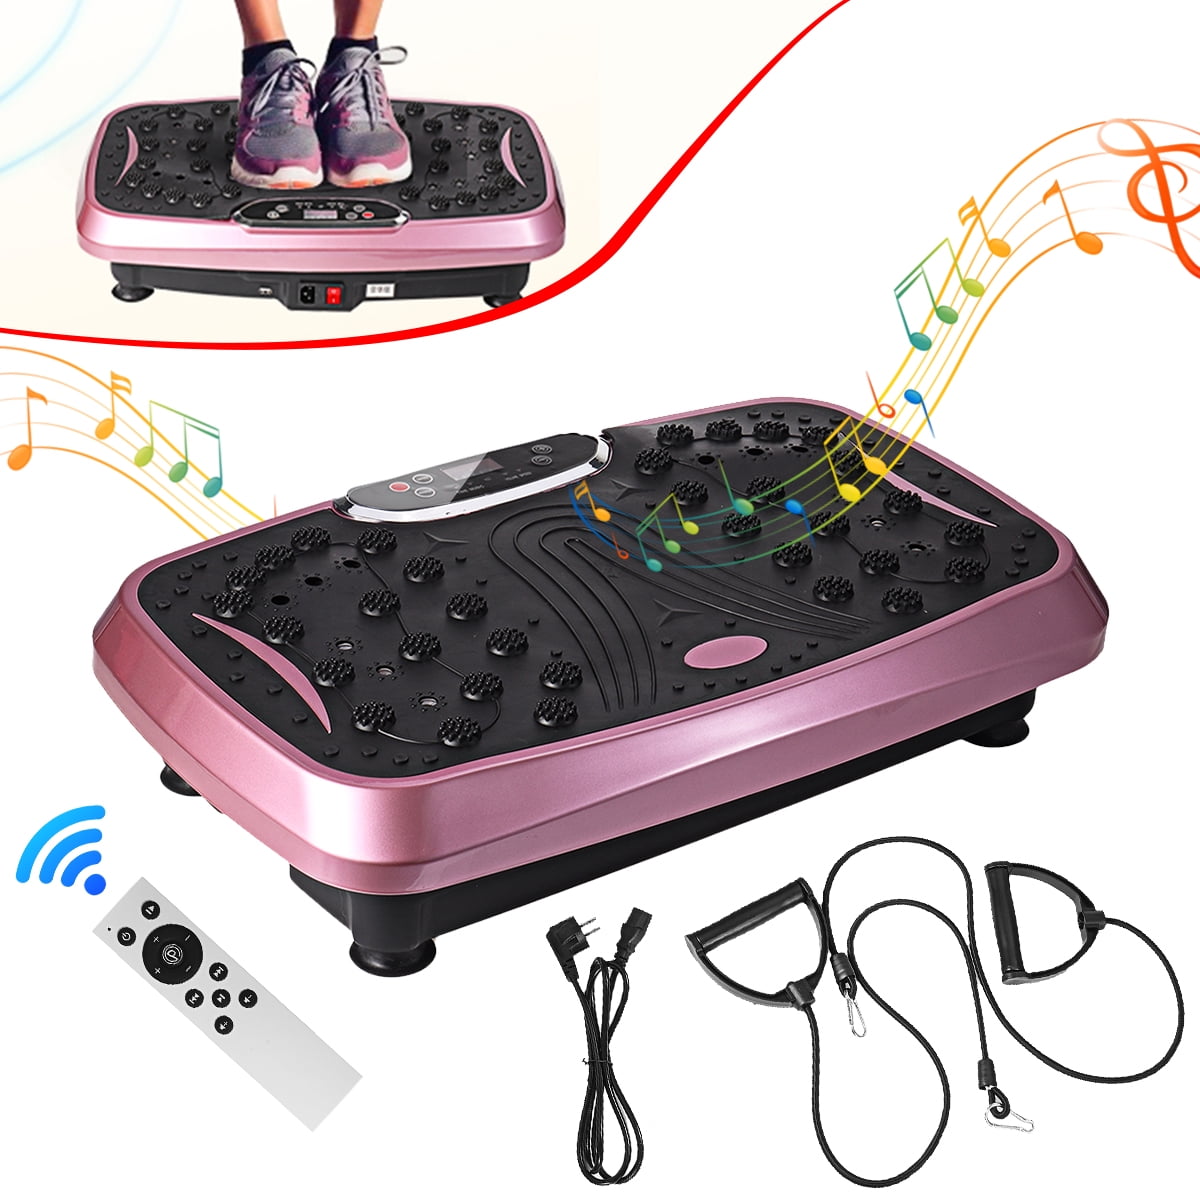 Details about  / Vibration Platform Plate Gift Whole Body Massager Machine Slim Exercise Fitness